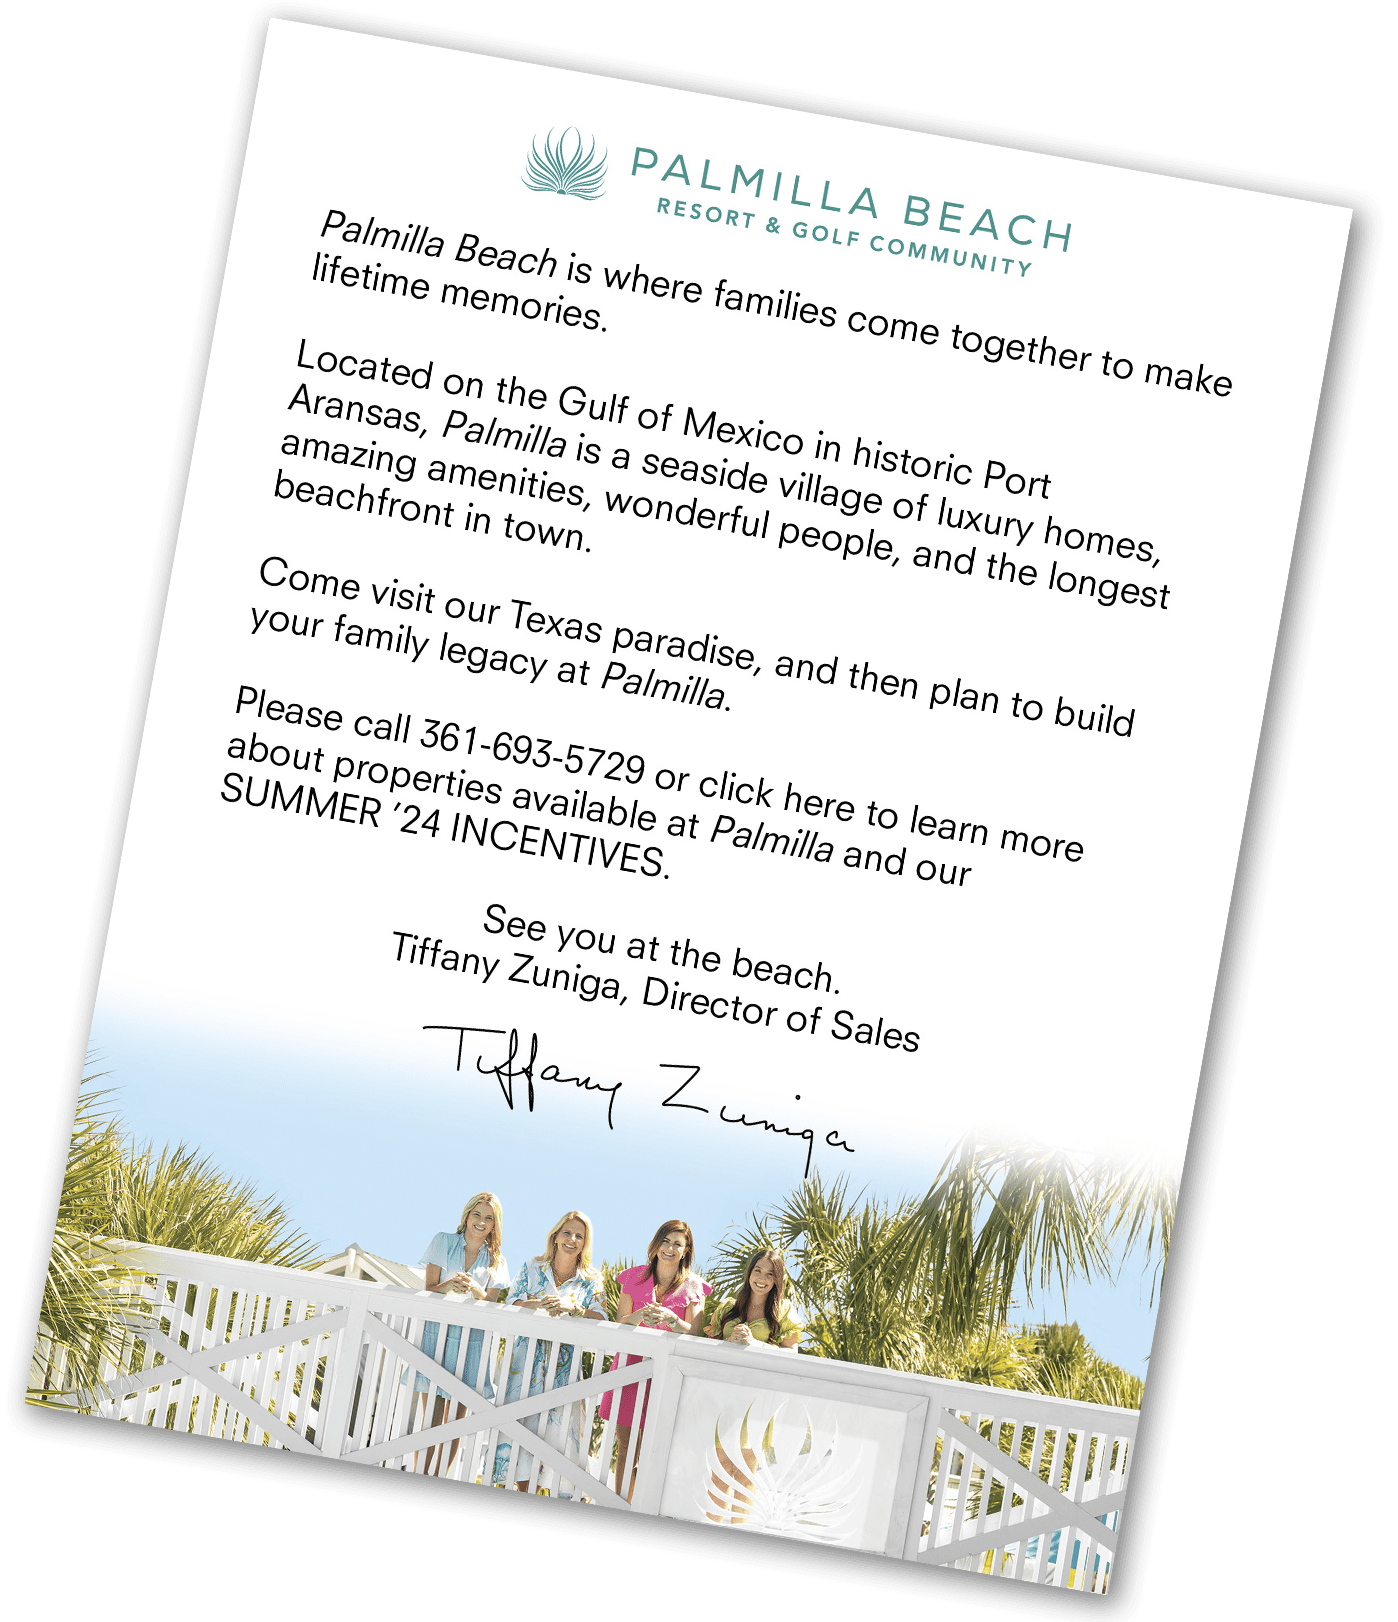 Welcome to Palmilla Beach Letter from Tiffany Zuniga